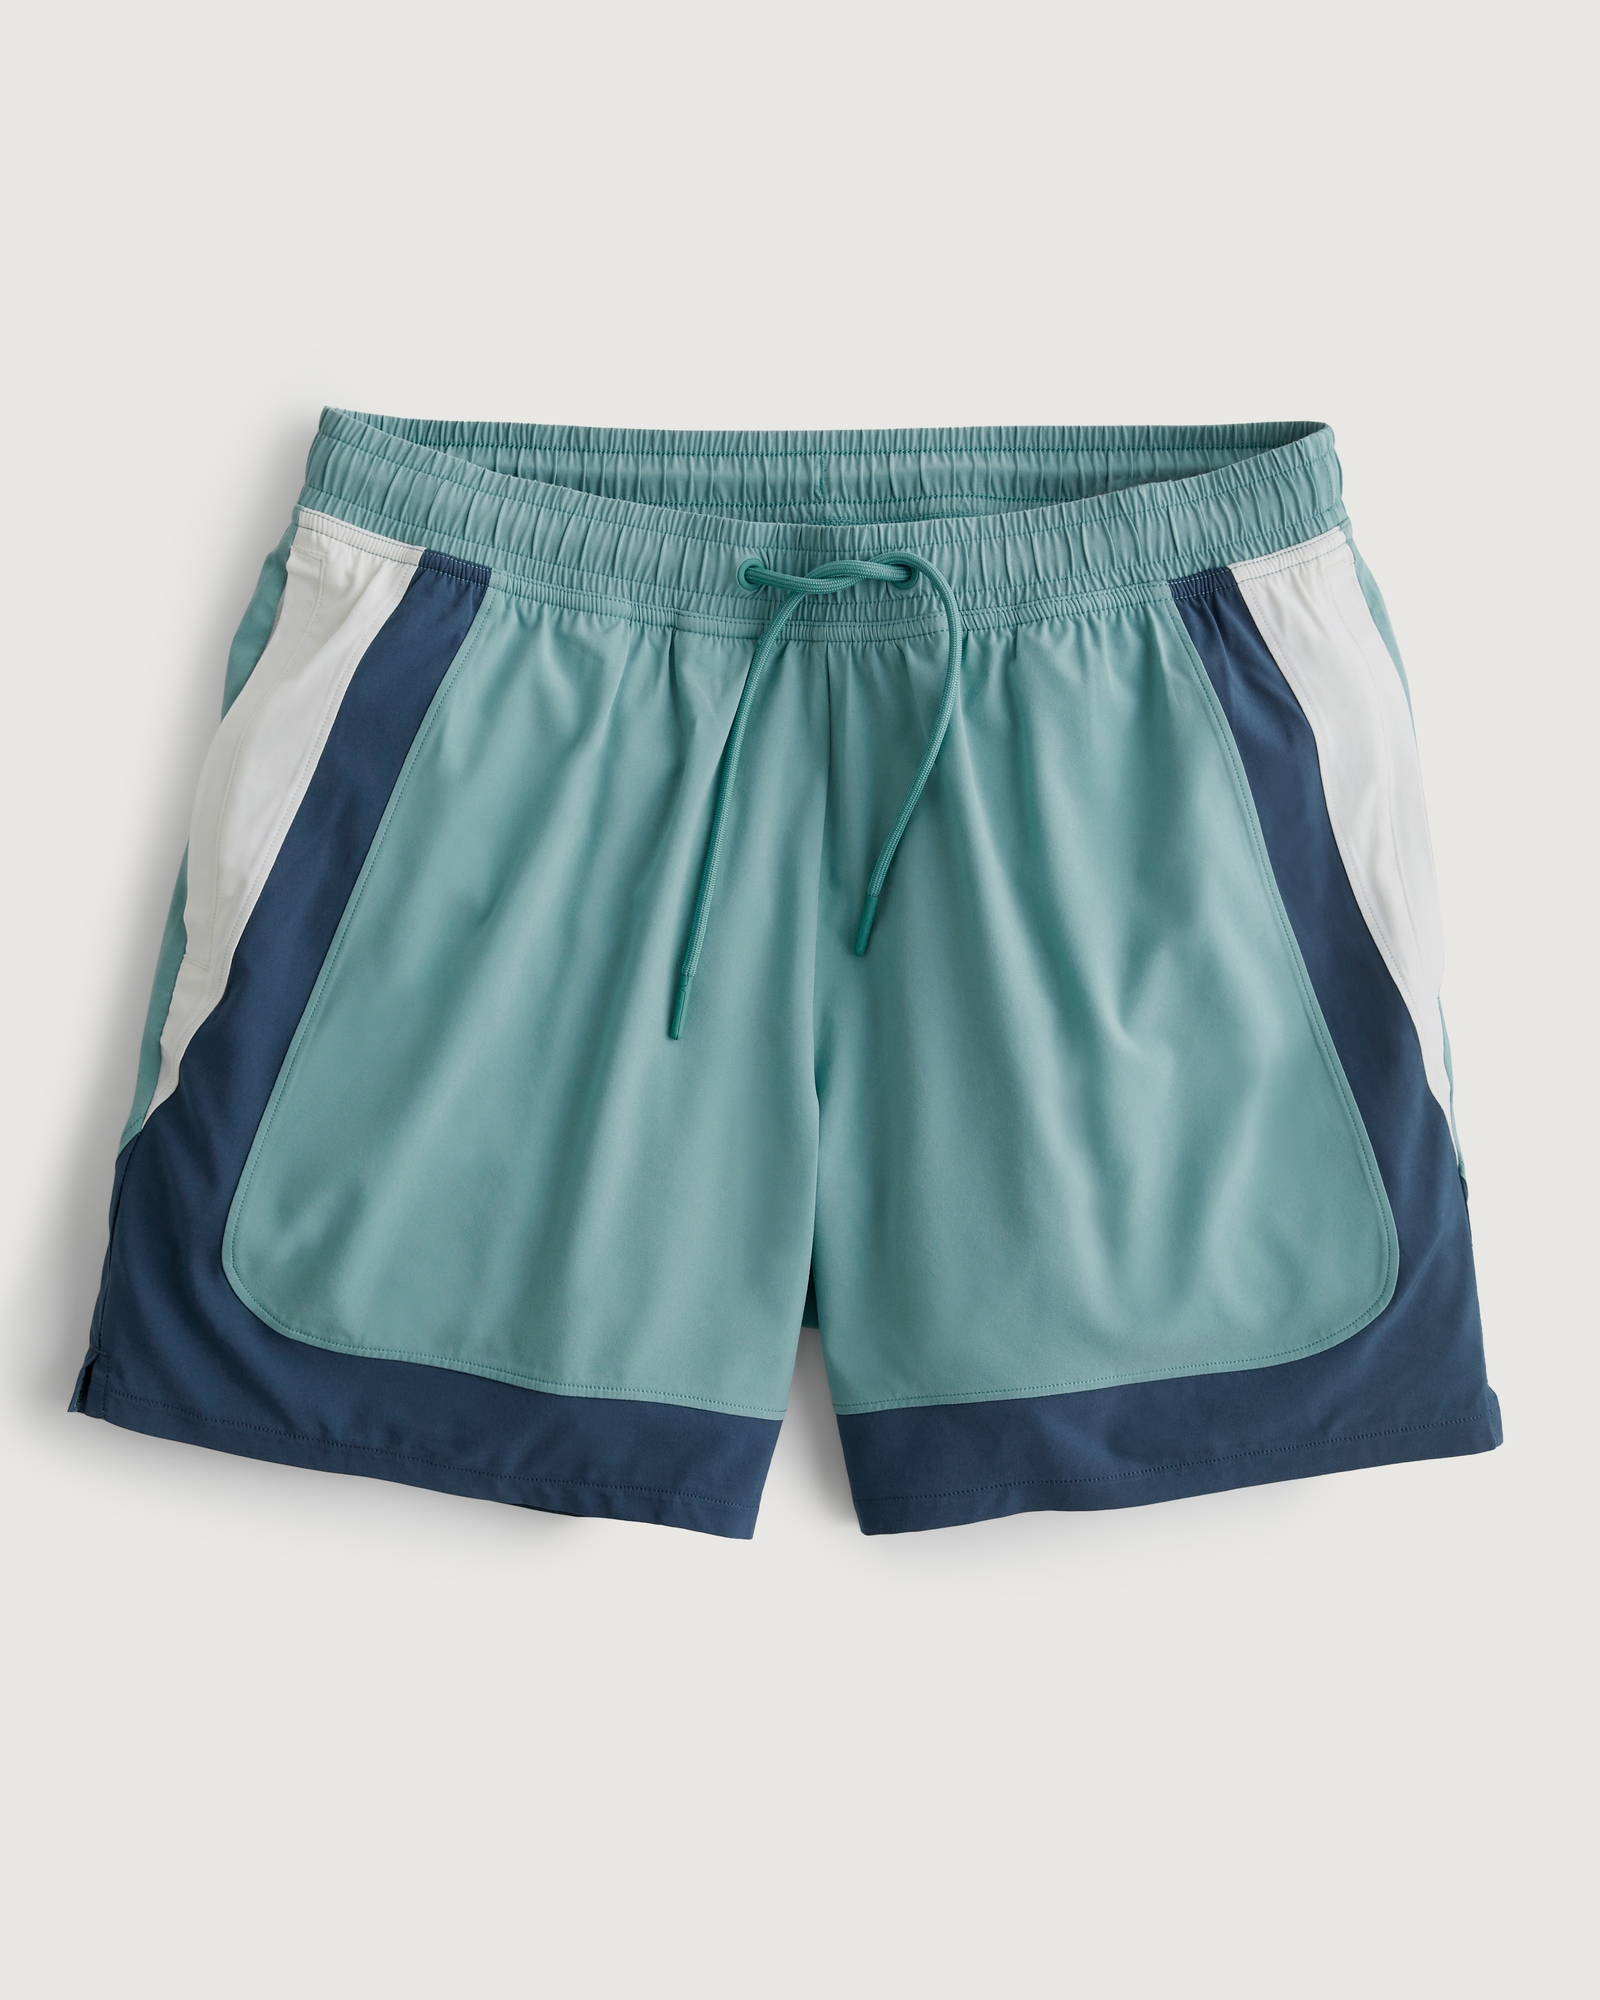 Men's Gilly Hicks Nylon-Lined Shorts in Mint Blue Size XL from Hollister Gilly Hicks